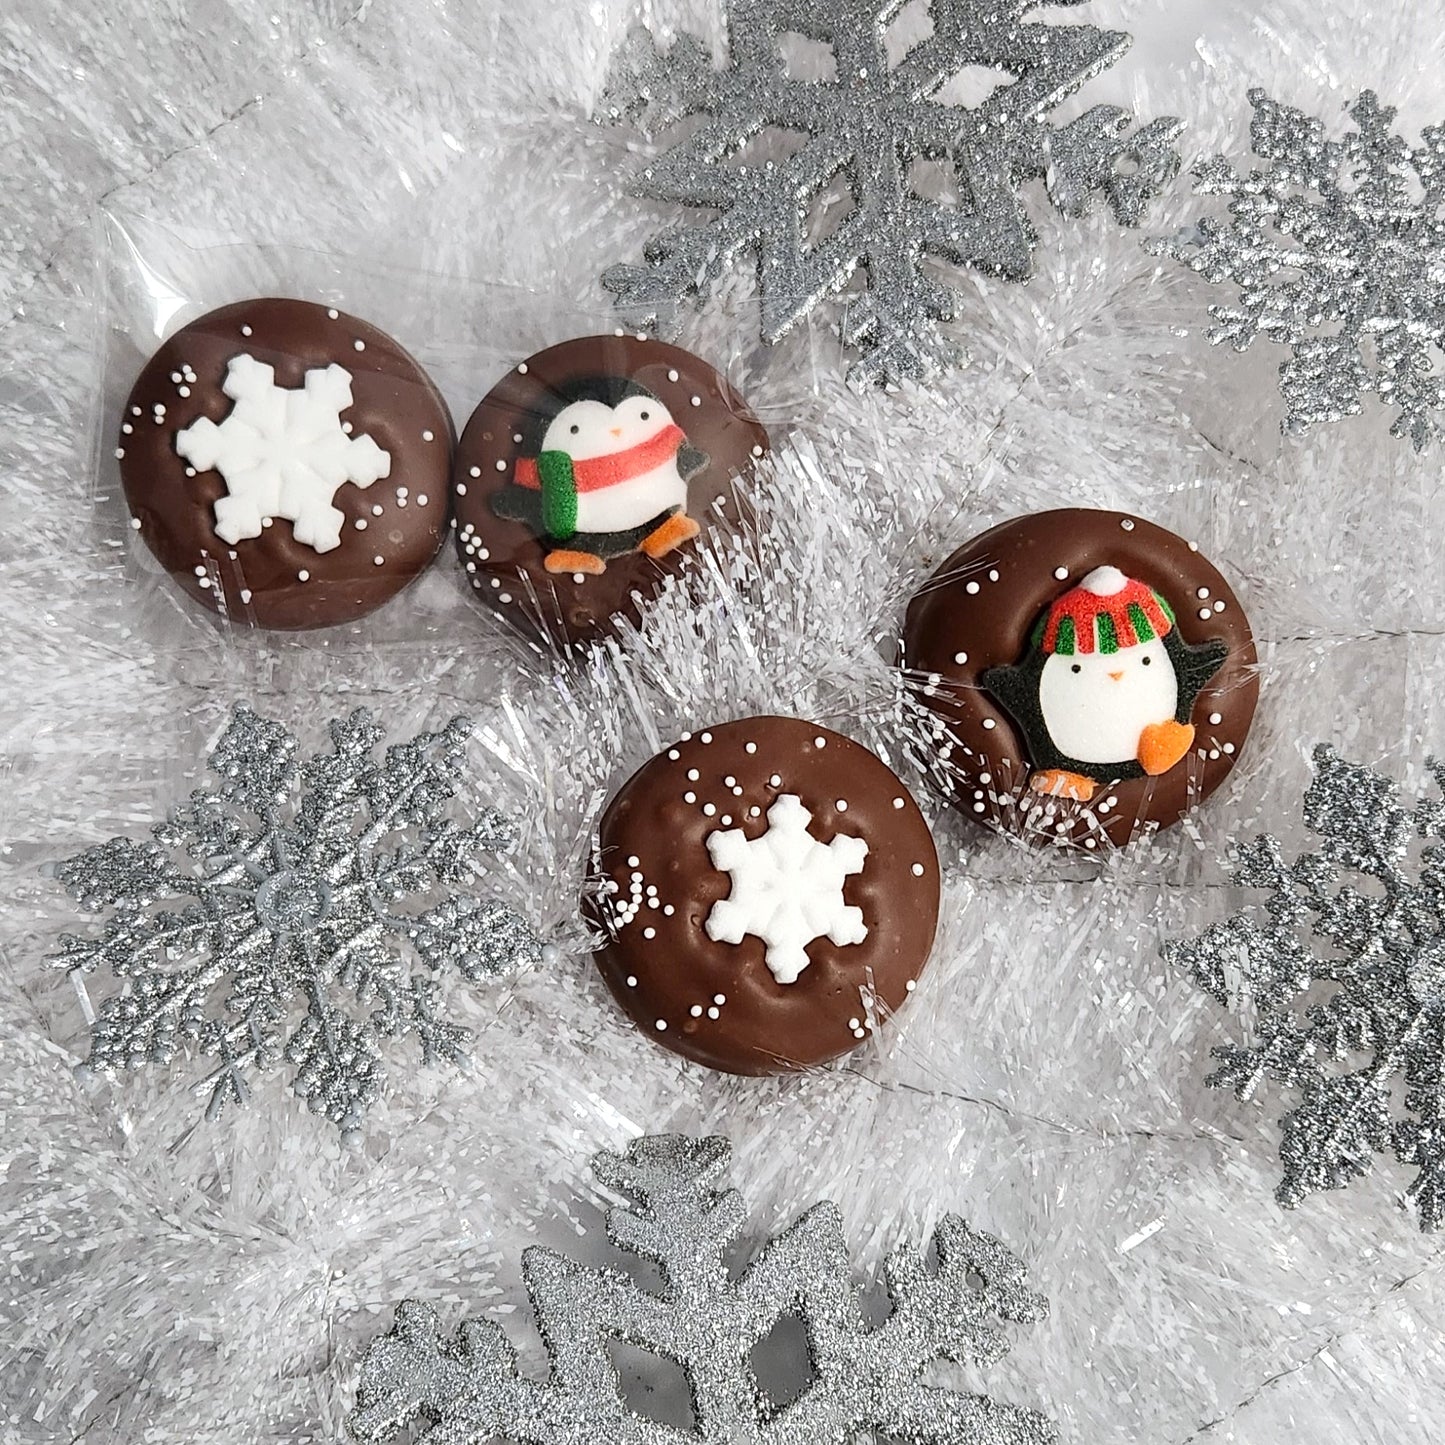 Winter Themed Oreo Cookies Covered in Chocolate